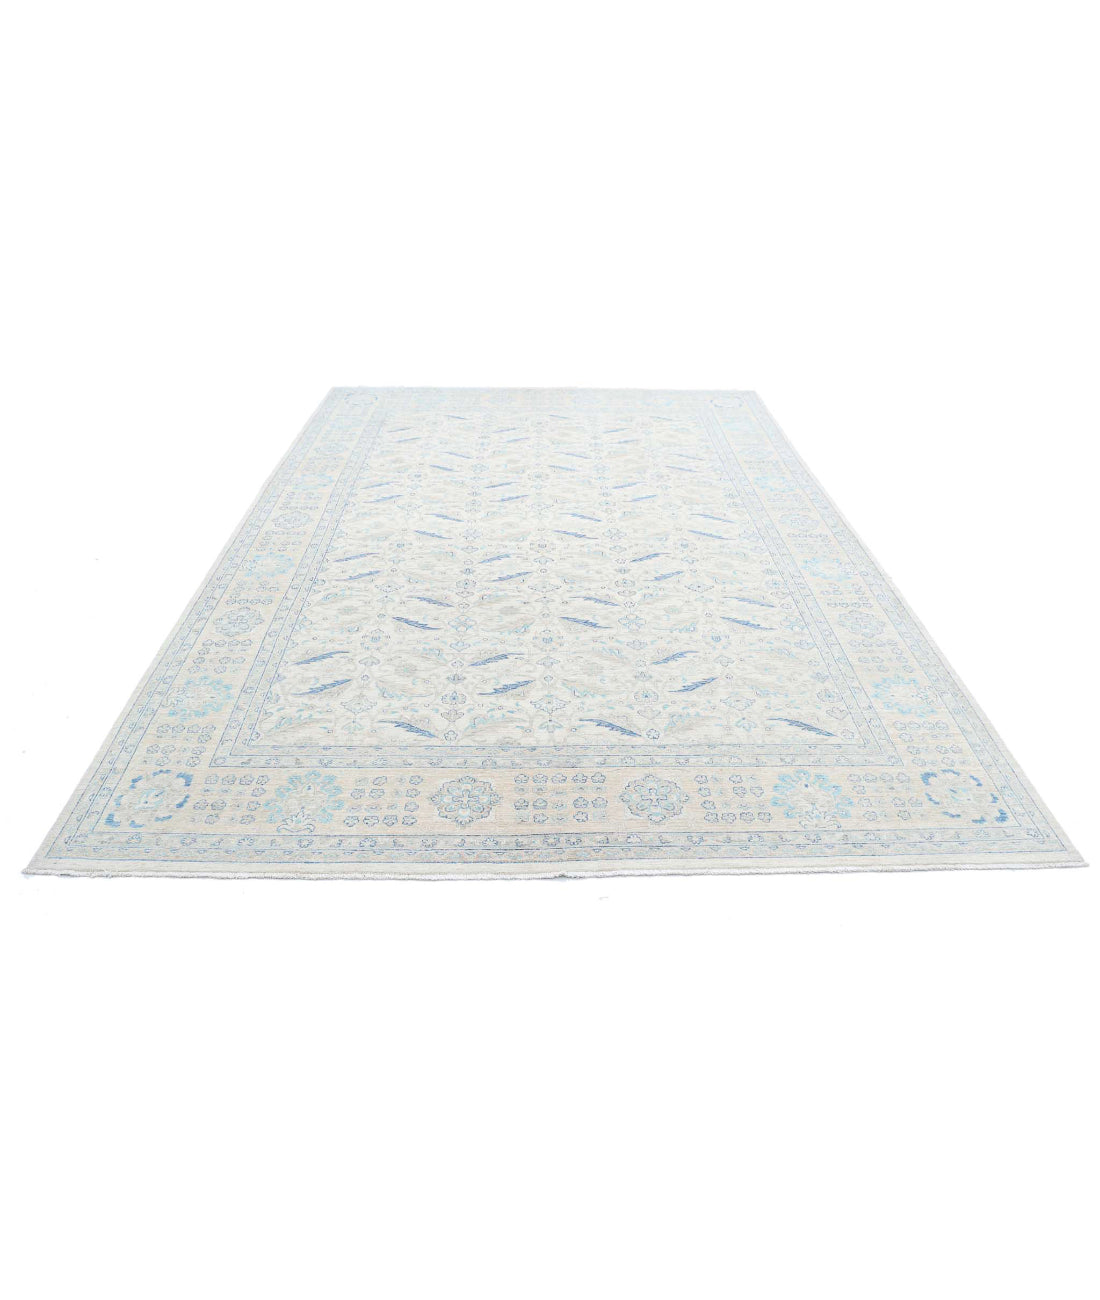 Serenity 8'2'' X 11'9'' Hand-Knotted Wool Rug 8'2'' x 11'9'' (245 X 353) / Ivory / Beige